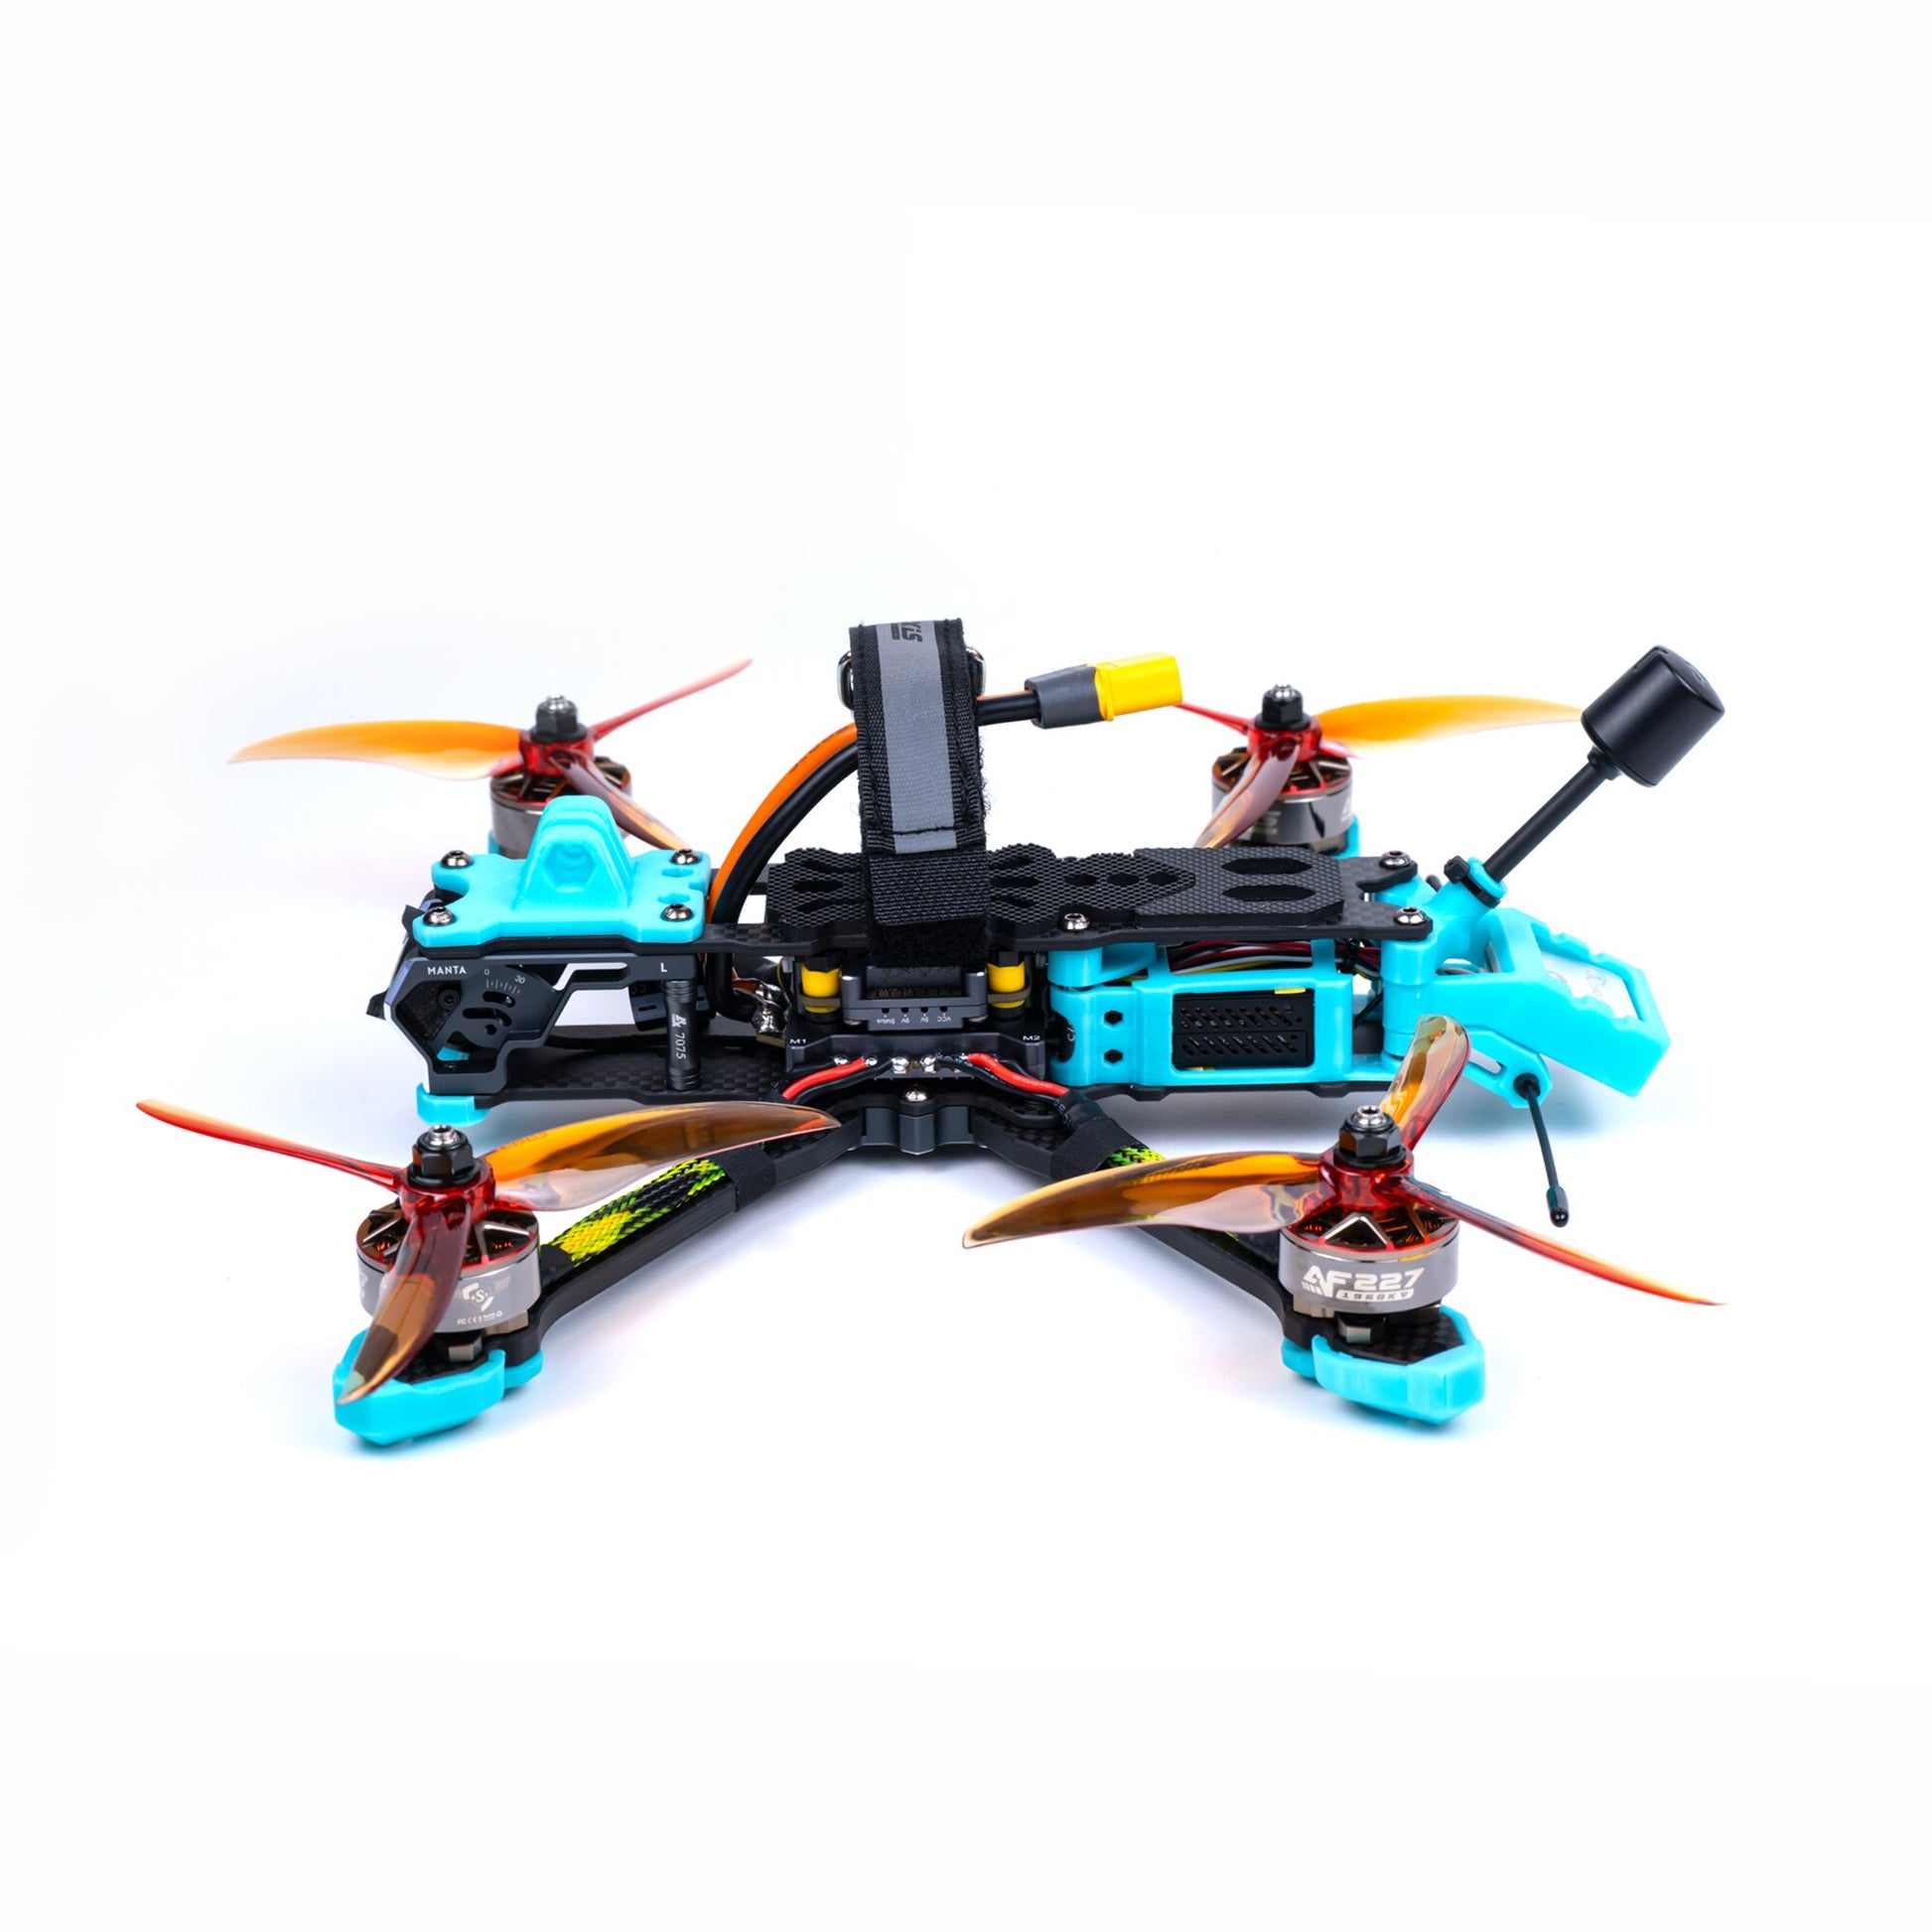 Axisflying MANTA5" - 5inch FPV Freestyle Ture X DJI O3 Air Unit with GPS -6S